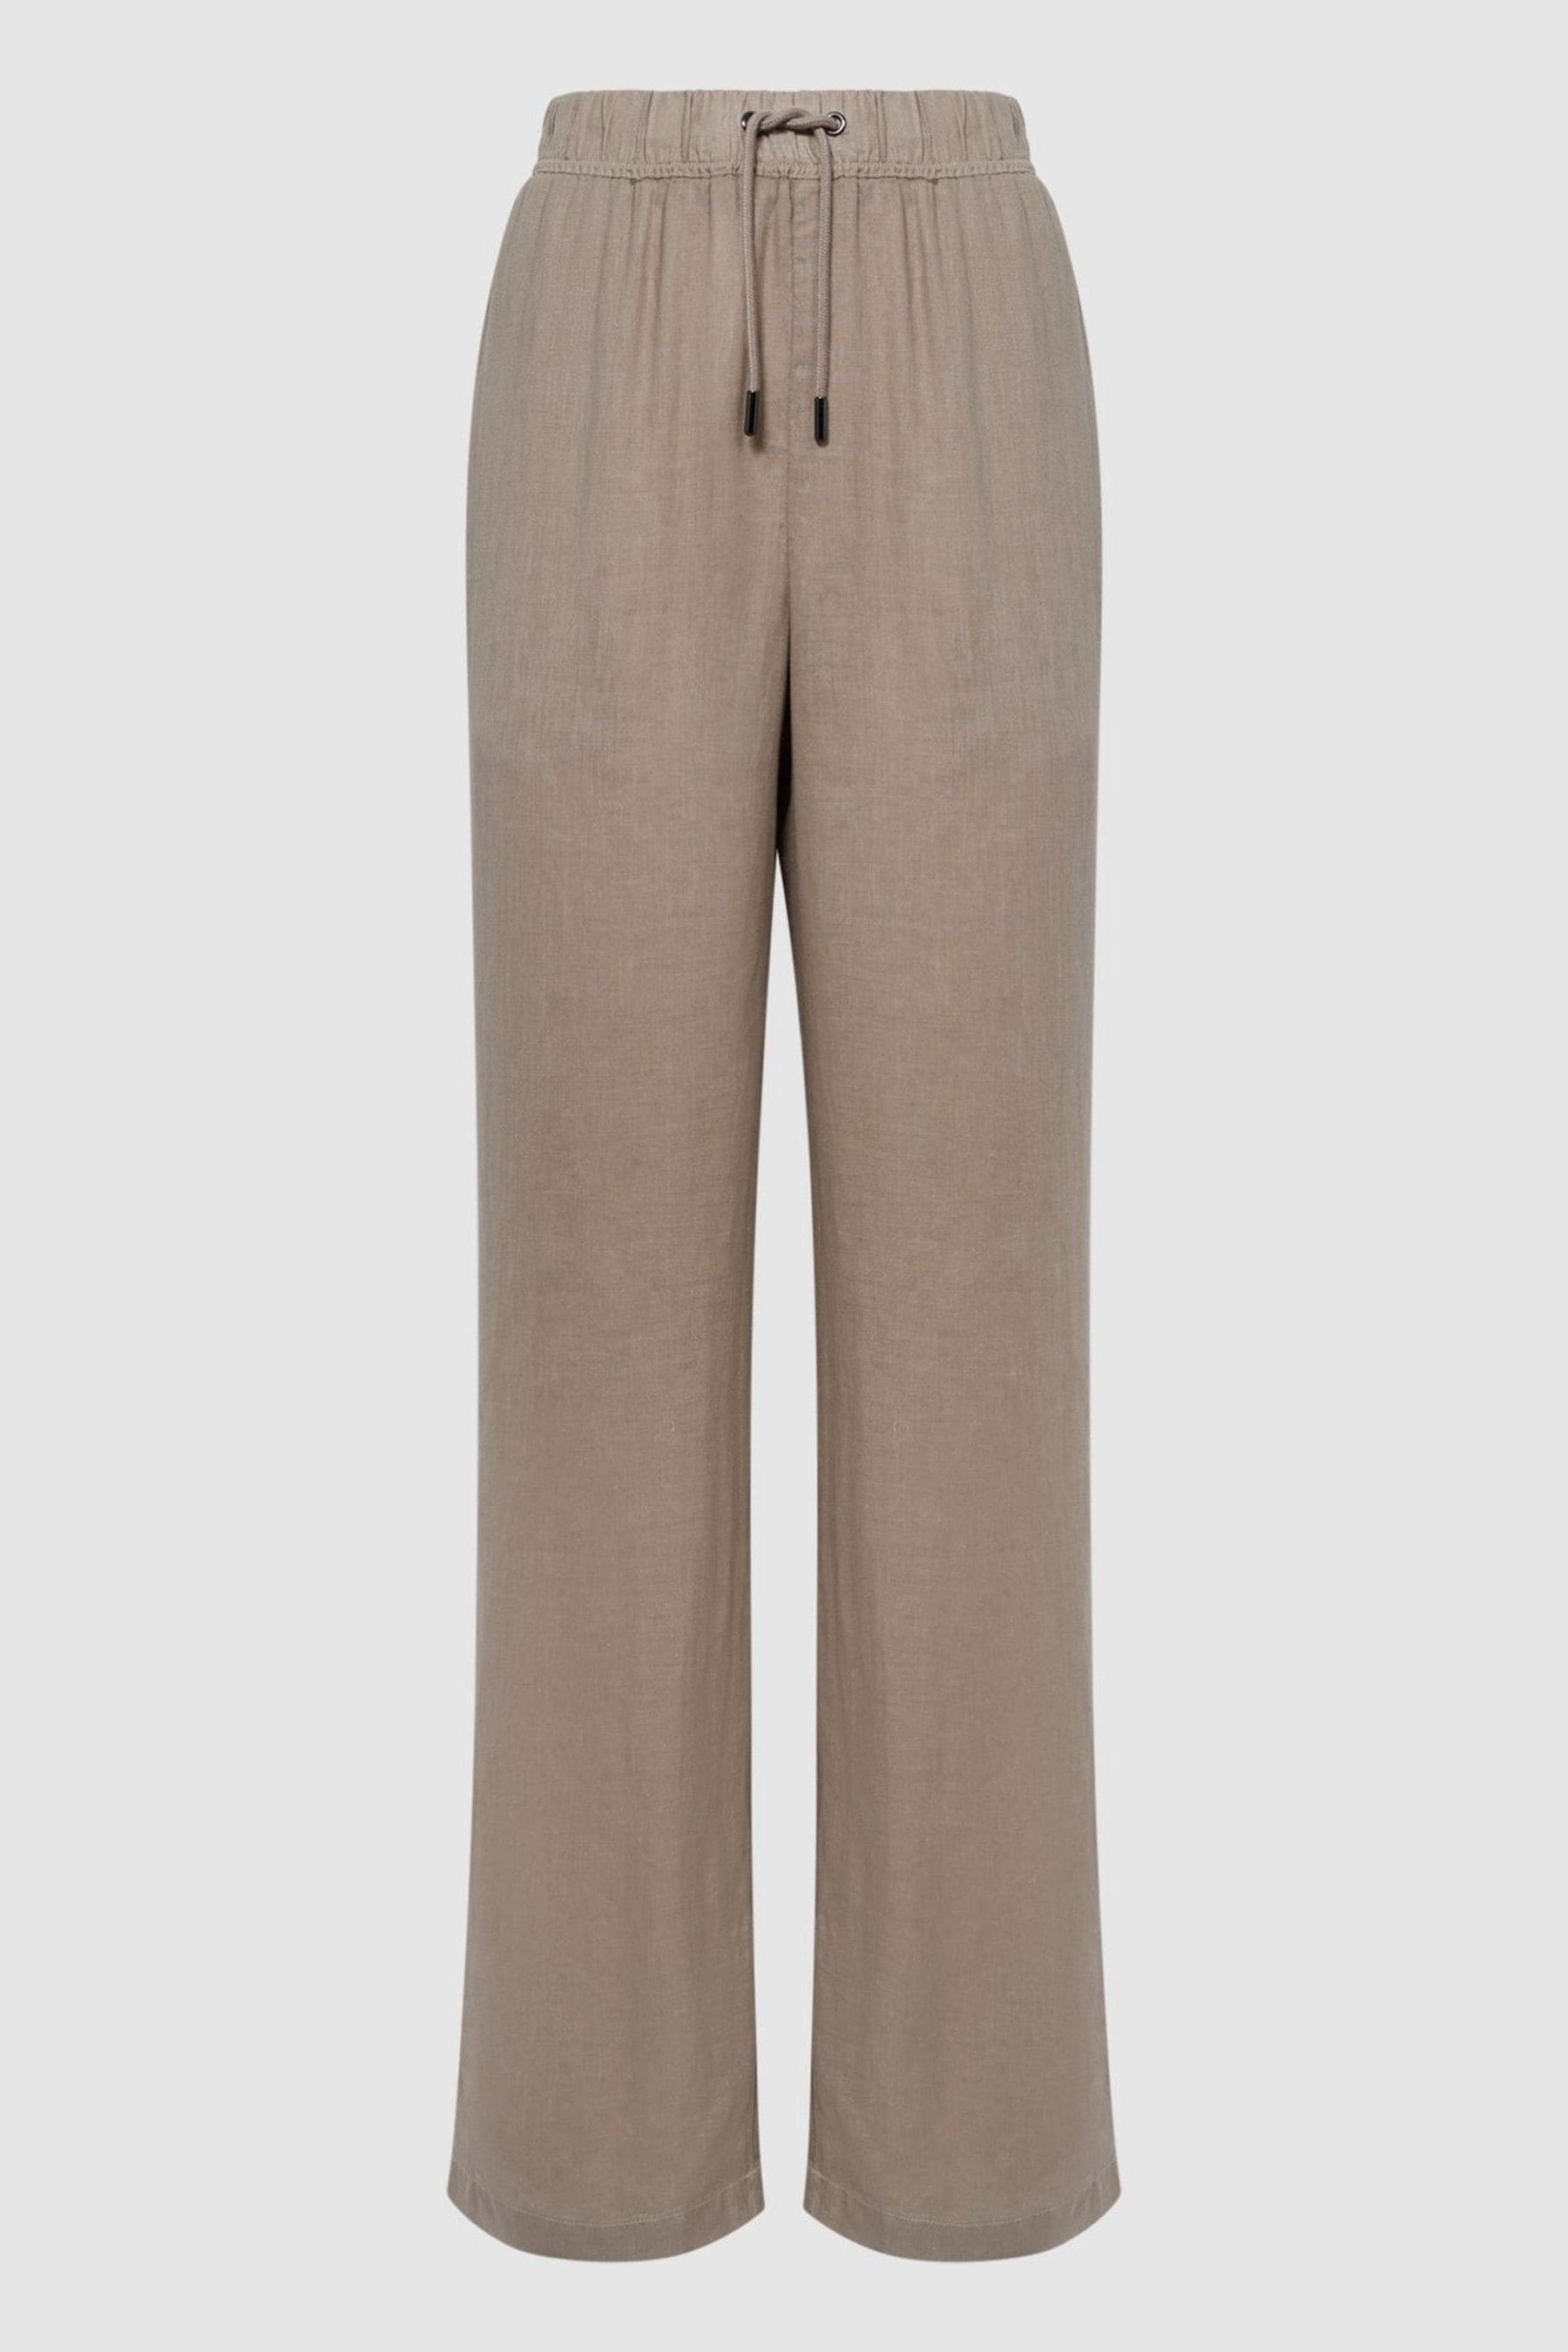 Buy Reiss Mink Cleo Linen Wide Leg Drawstring Trousers from the Next UK ...